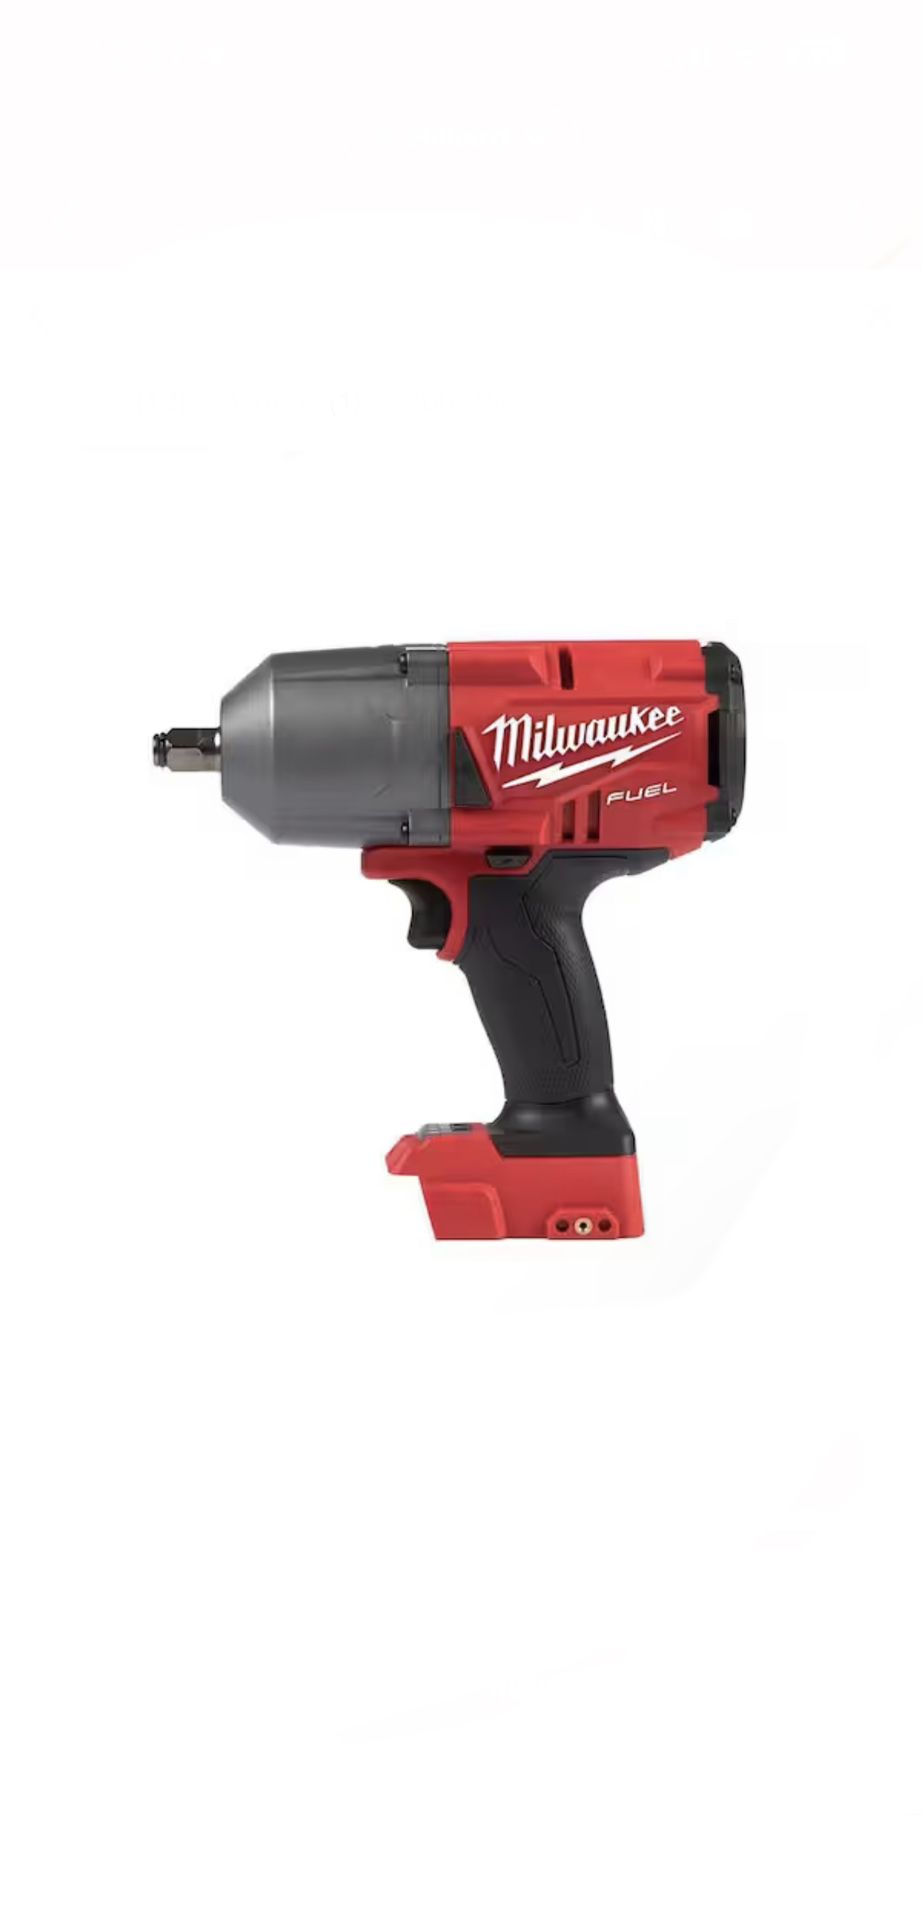 New Milwaukee M18 FUEL 18V Lithium-Ion Brushless Cordless 1/2 in. Impact Wrench with Friction Ring (Tool-Only) $200 Firm